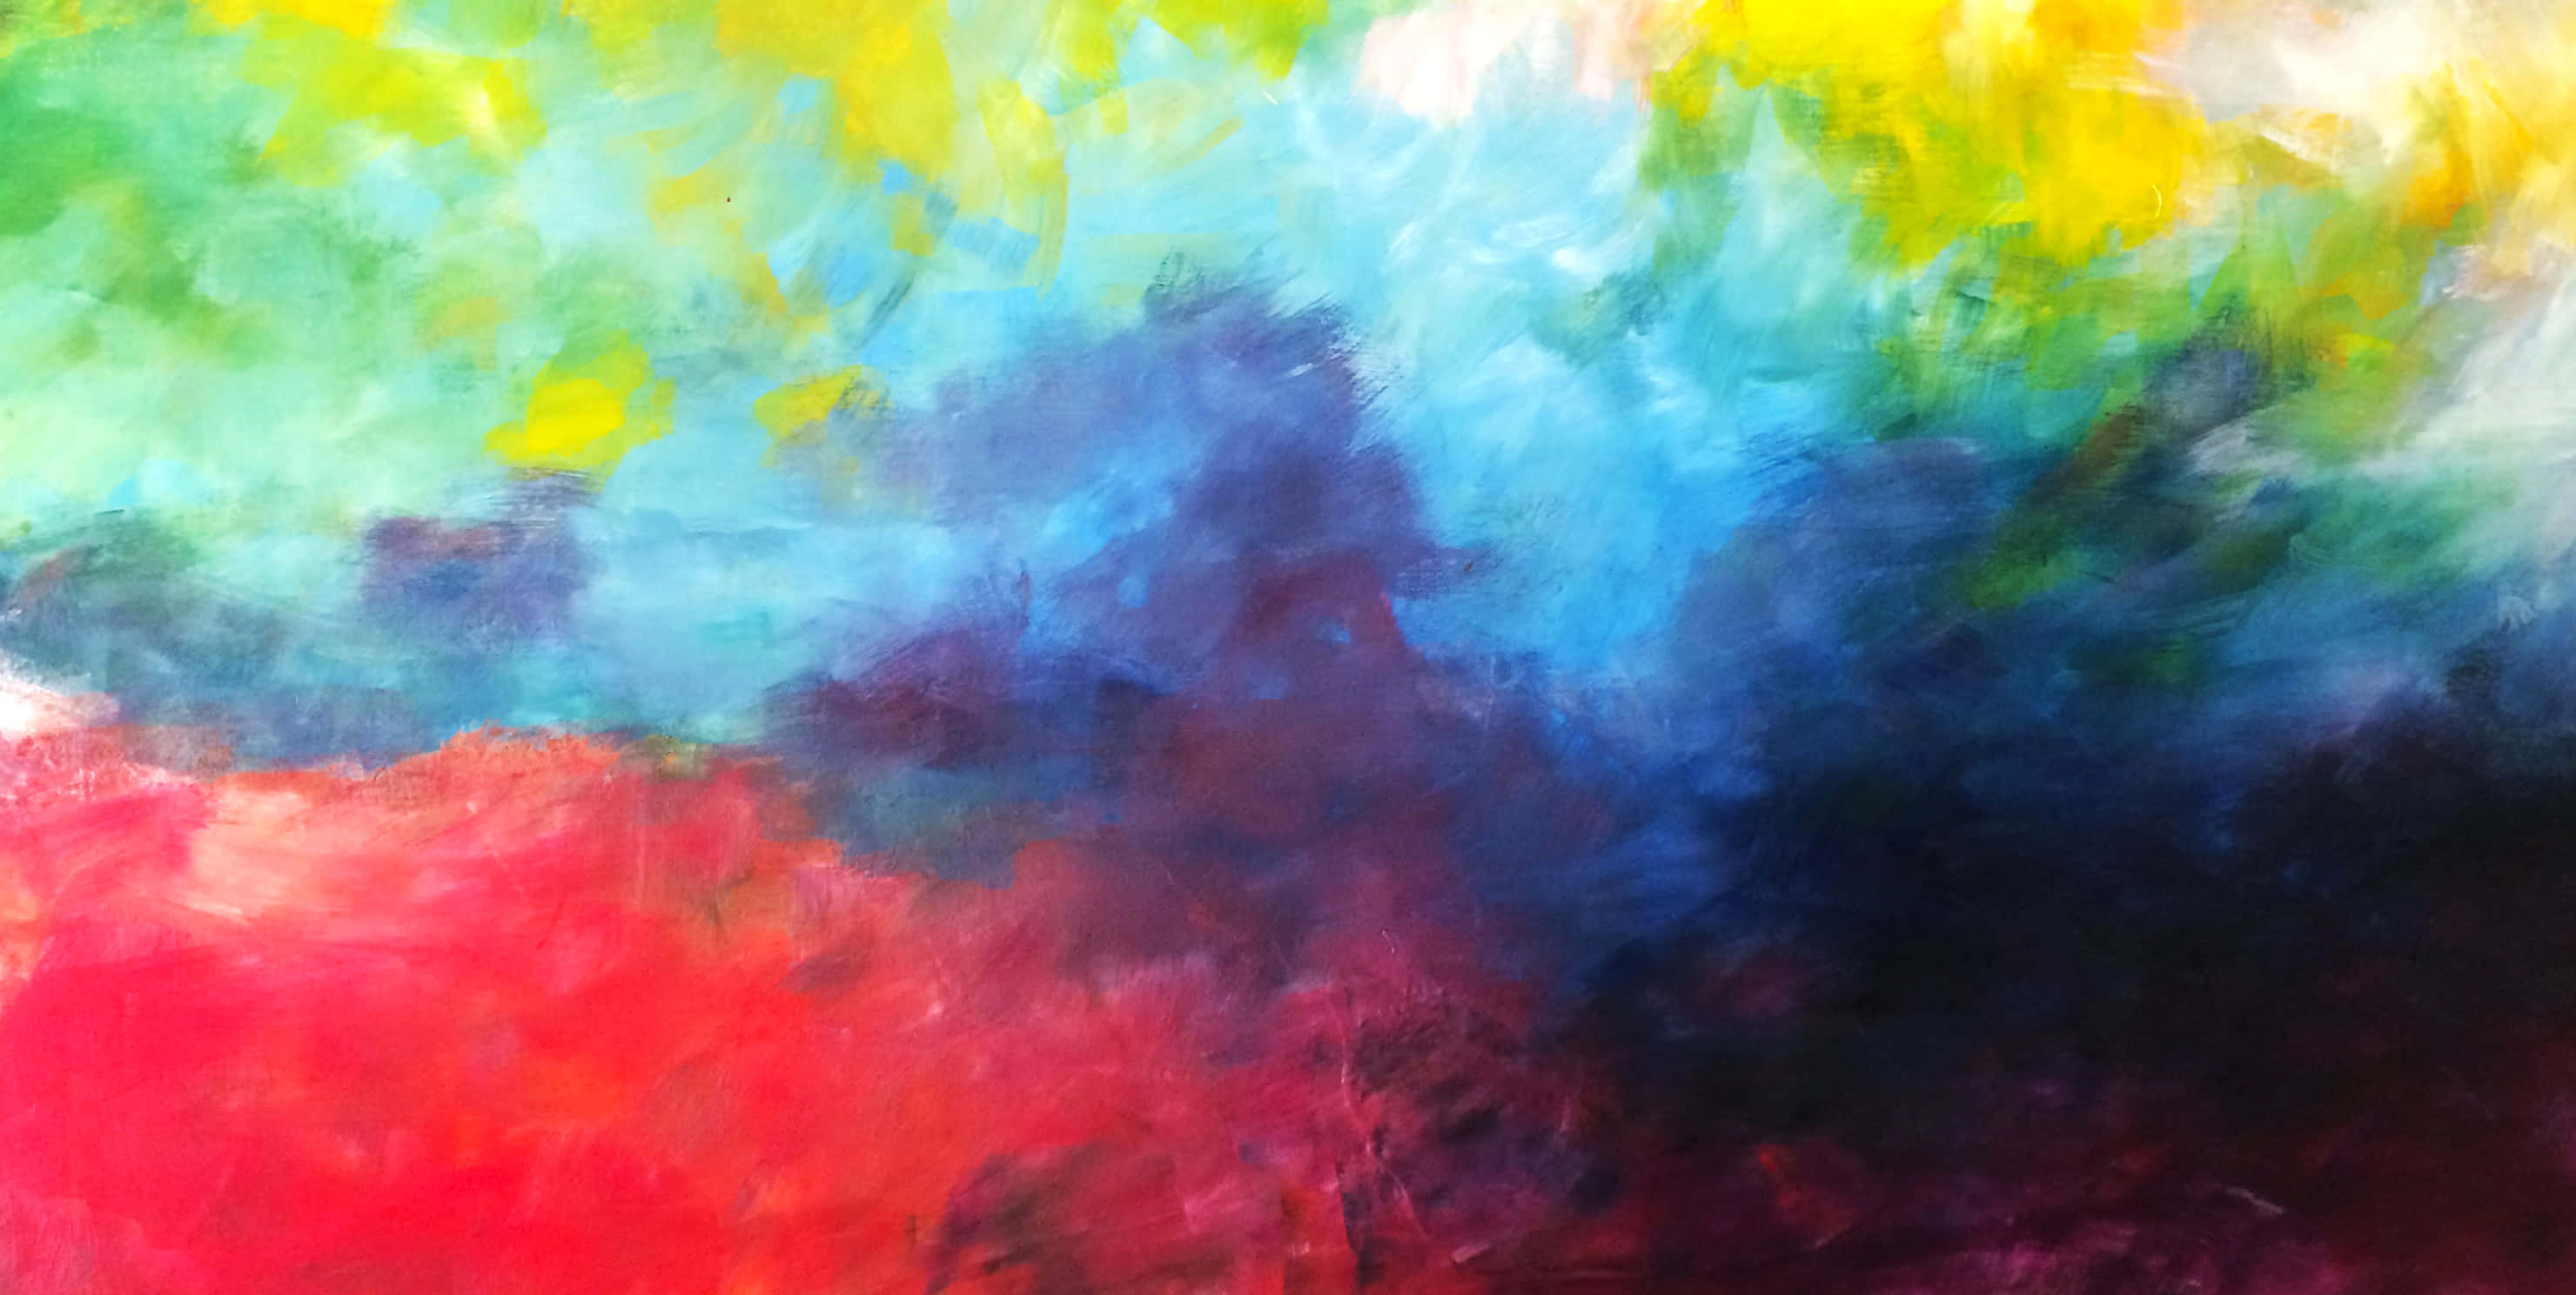 Vibrant Abstract Art Explosion